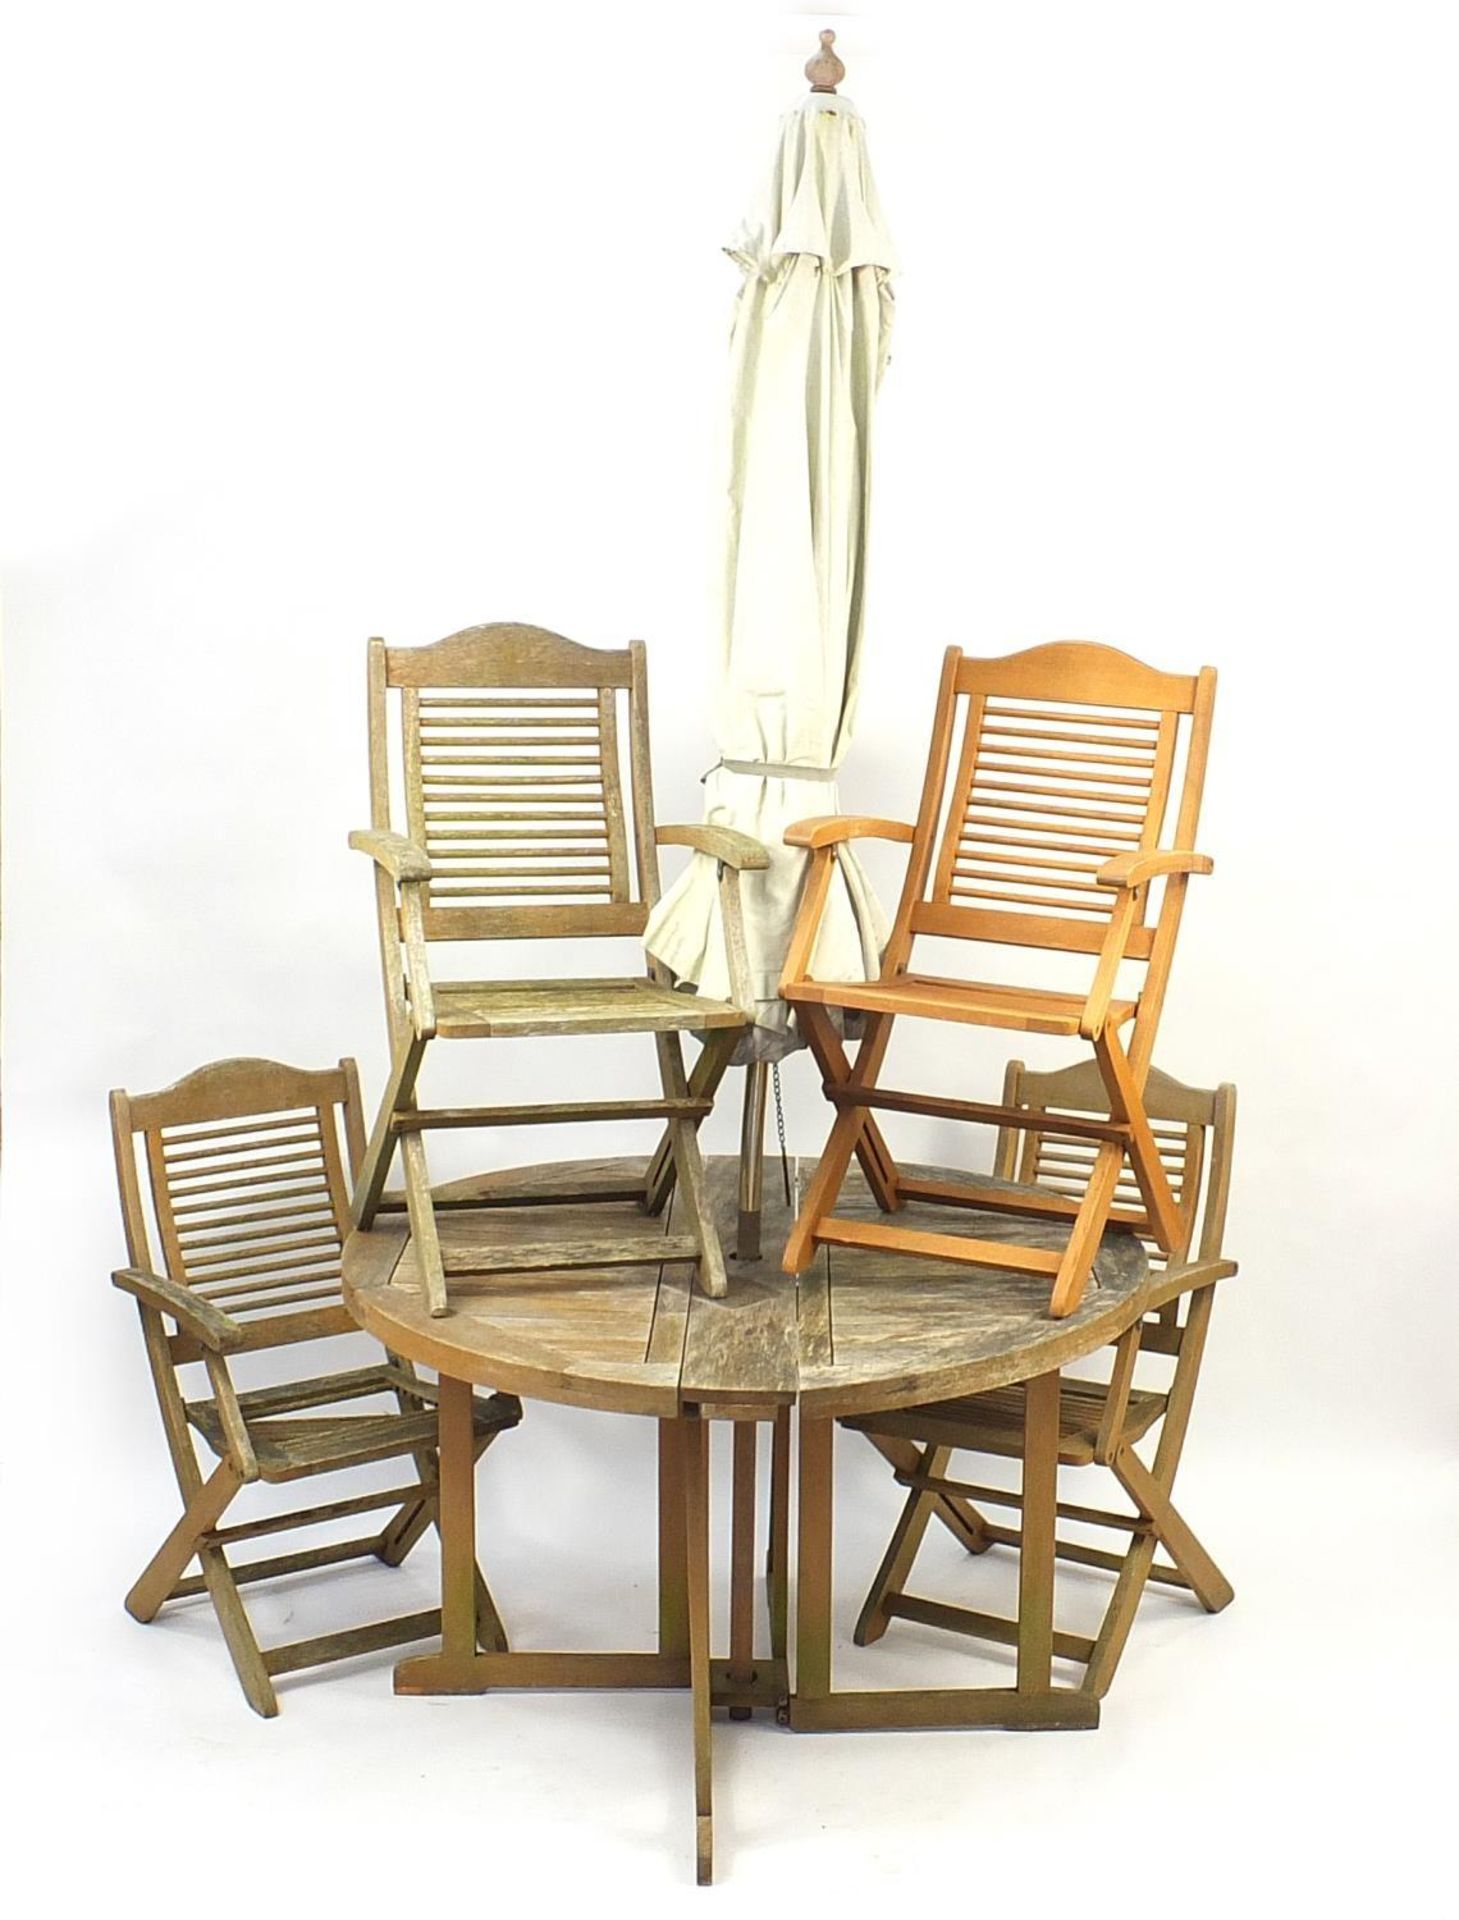 Teak folding garden table with parasol and four chairs